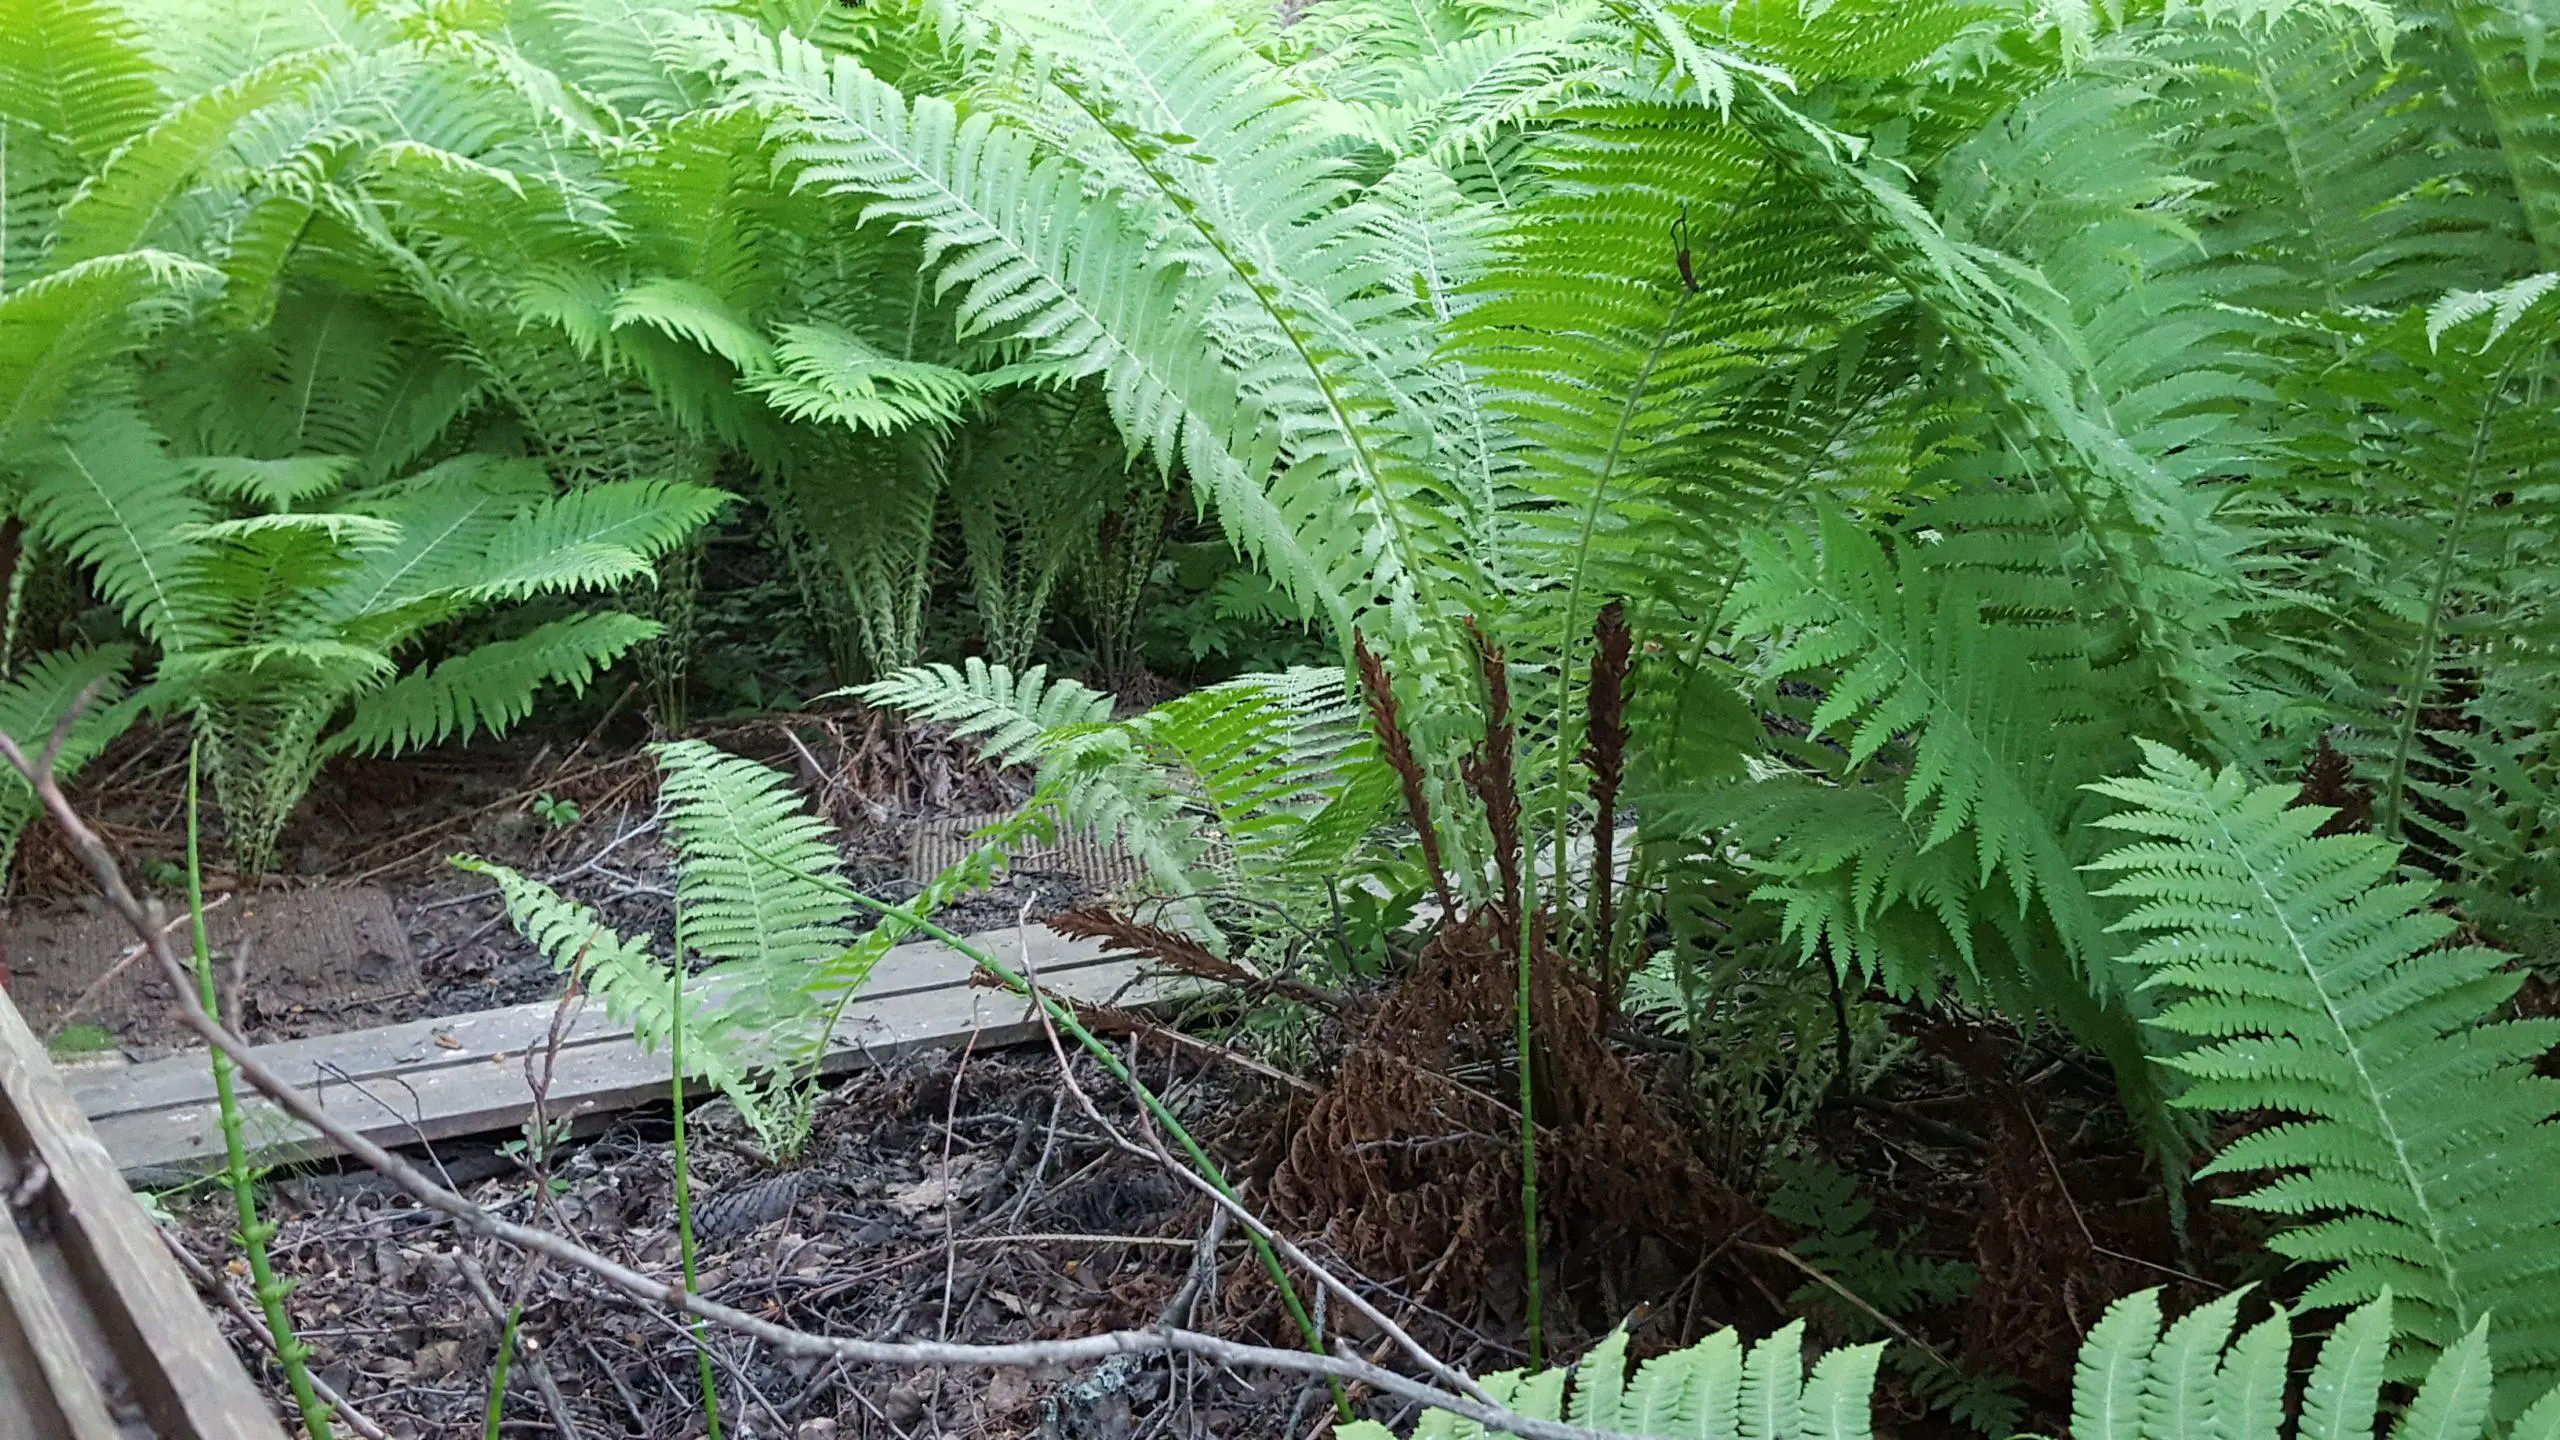 Ferns growing up from the ground